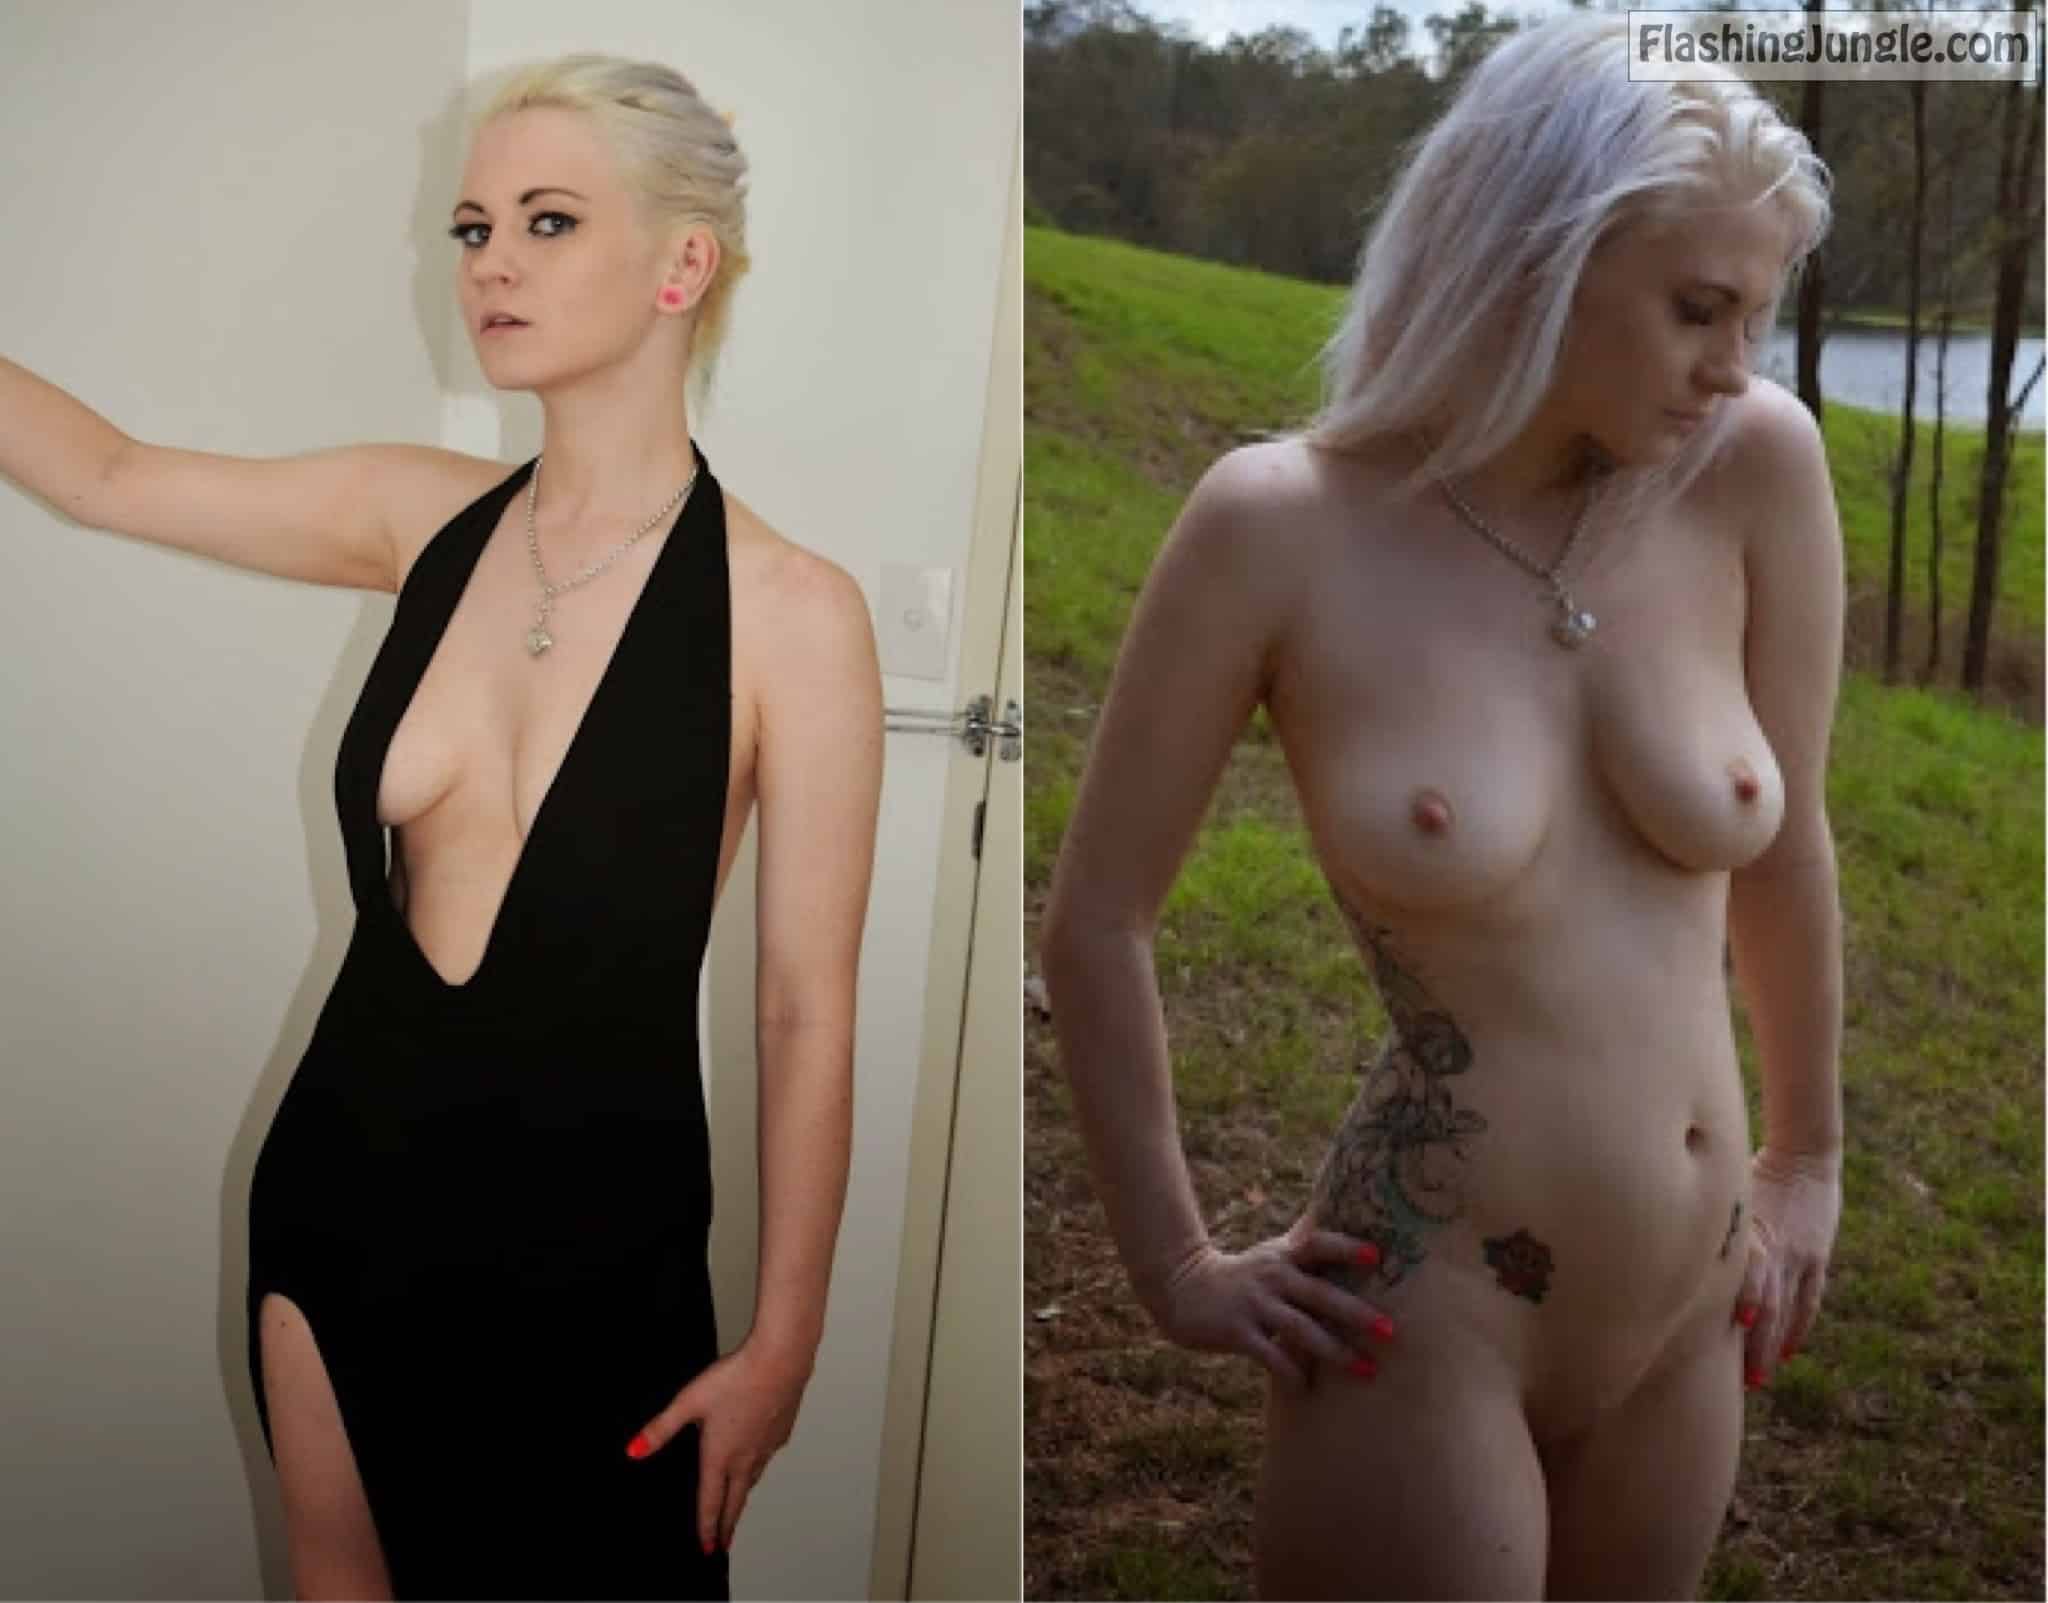 Real Amateurs Public Nudity Pics - Inked Blonde Dressed Nude – Aussie From Brisbane